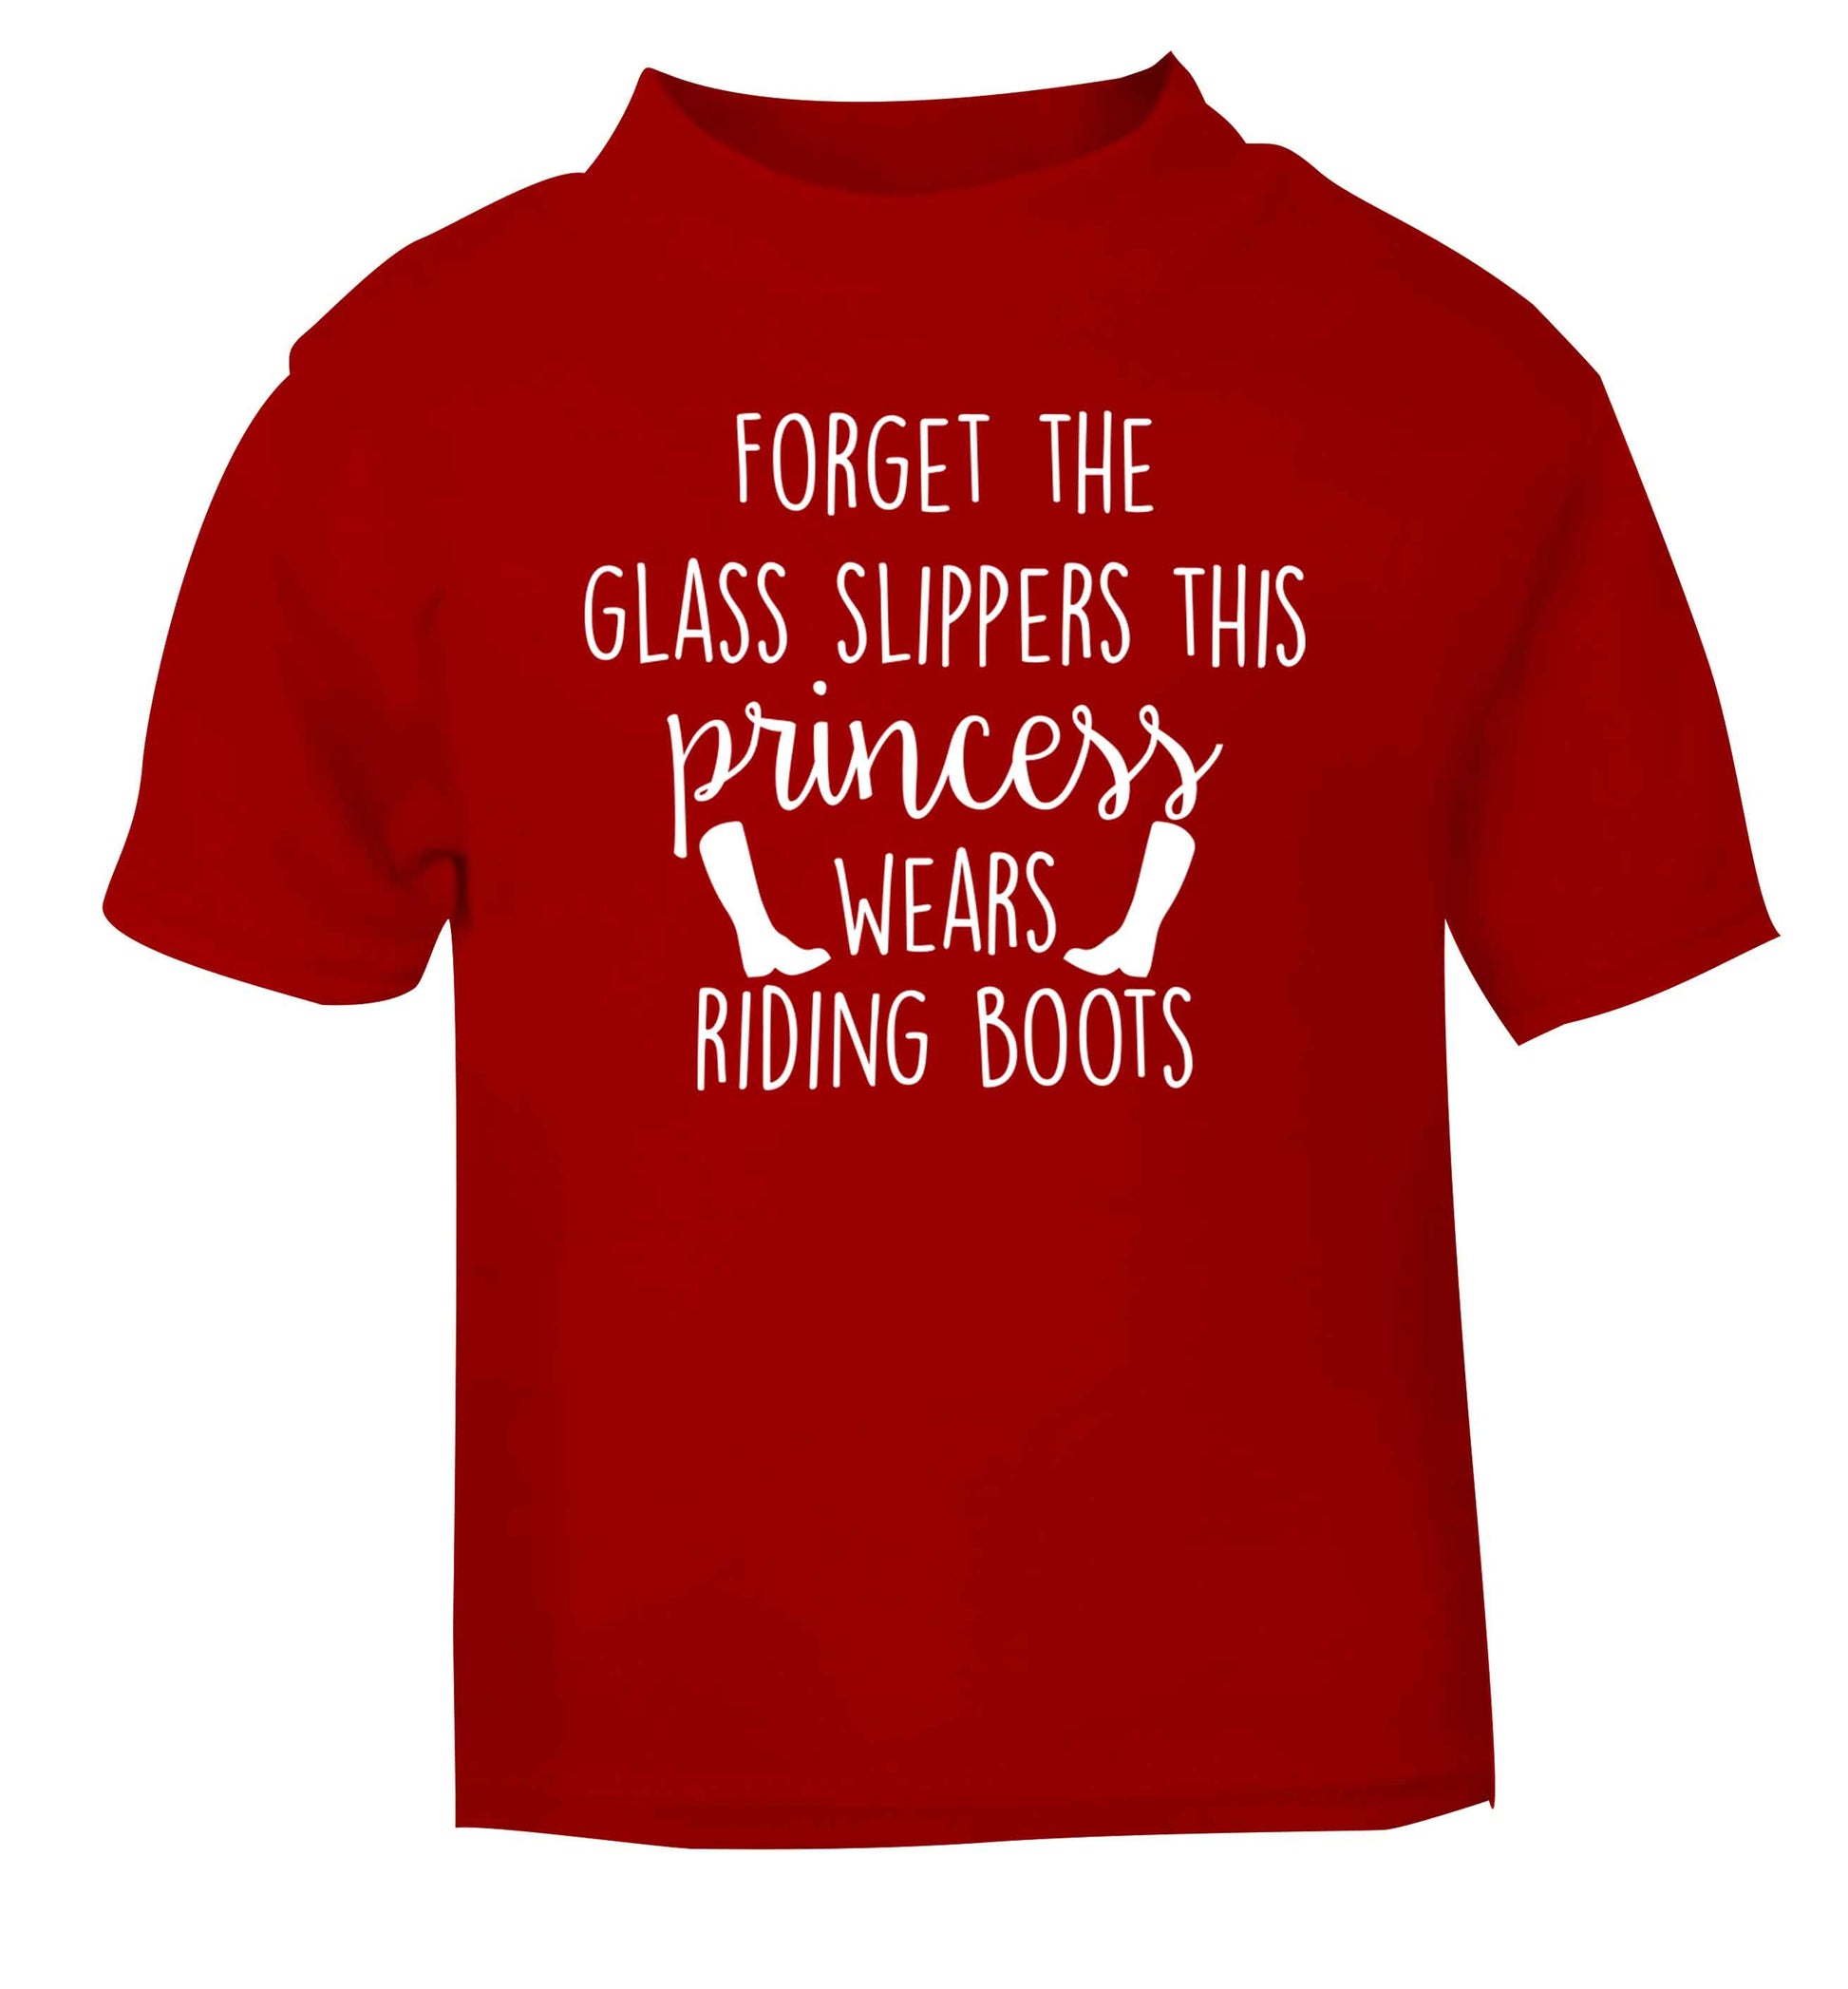 Forget the glass slippers this princess wears riding boots red baby toddler Tshirt 2 Years